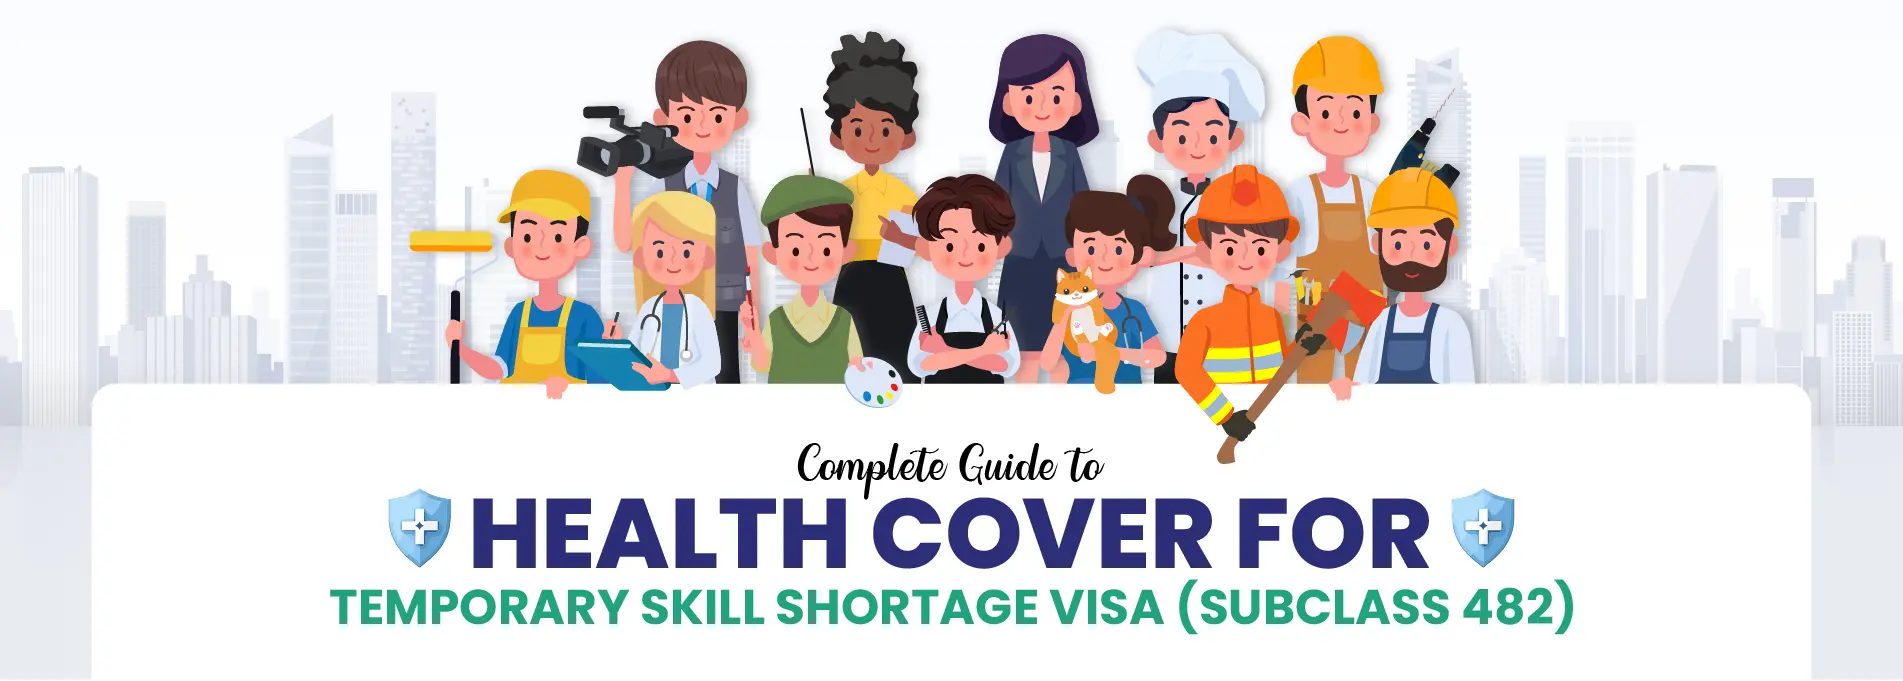 Complete Guide to Health Cover for Temporary Skill Shortage Visa (subclass 482)